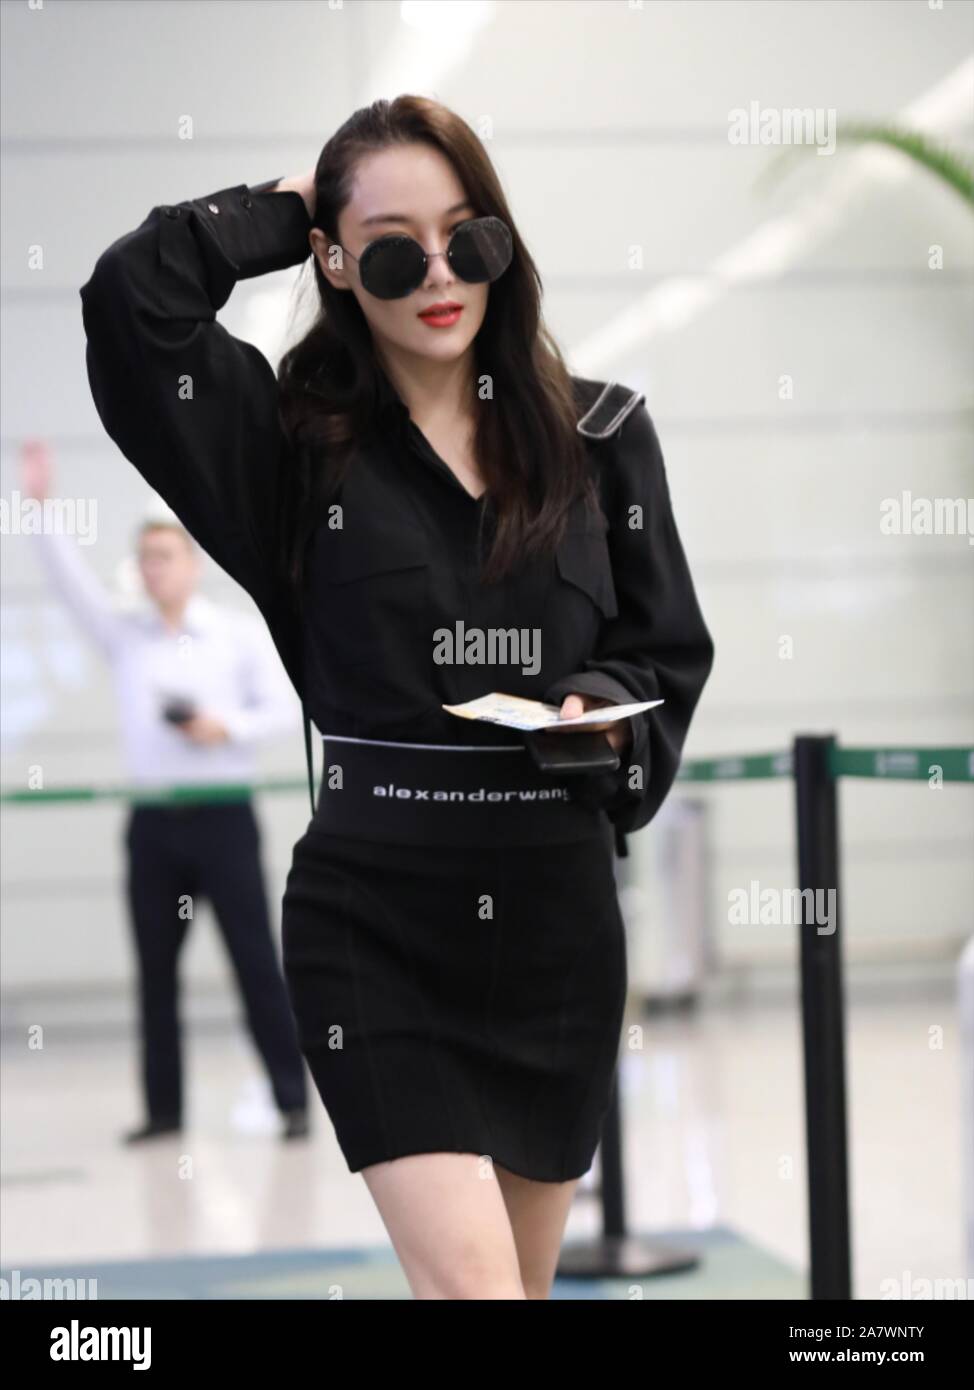 Chinese actress, singer and model Zhang Xinyu, also known as Viann Zhang,  shows up at an airport in Shanghai, China, 14 August 2019. Skirt: Alexande  Stock Photo - Alamy